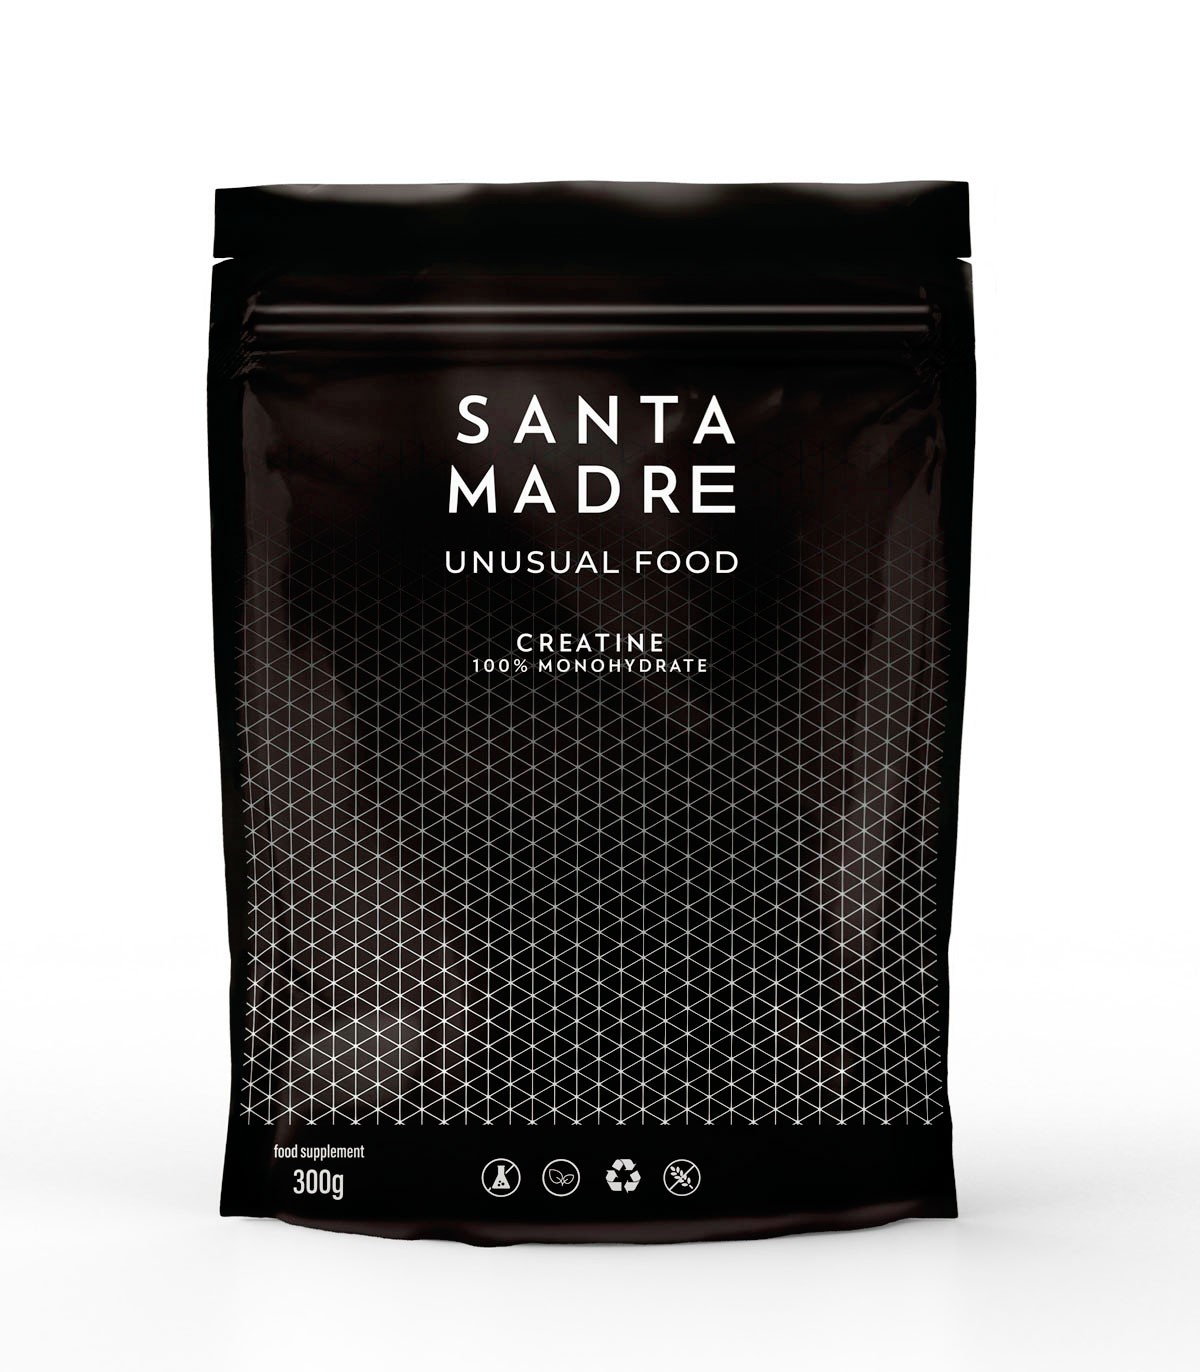 Online sale of SANTA MADRE creatine monohydrate for athletes at a discounted price